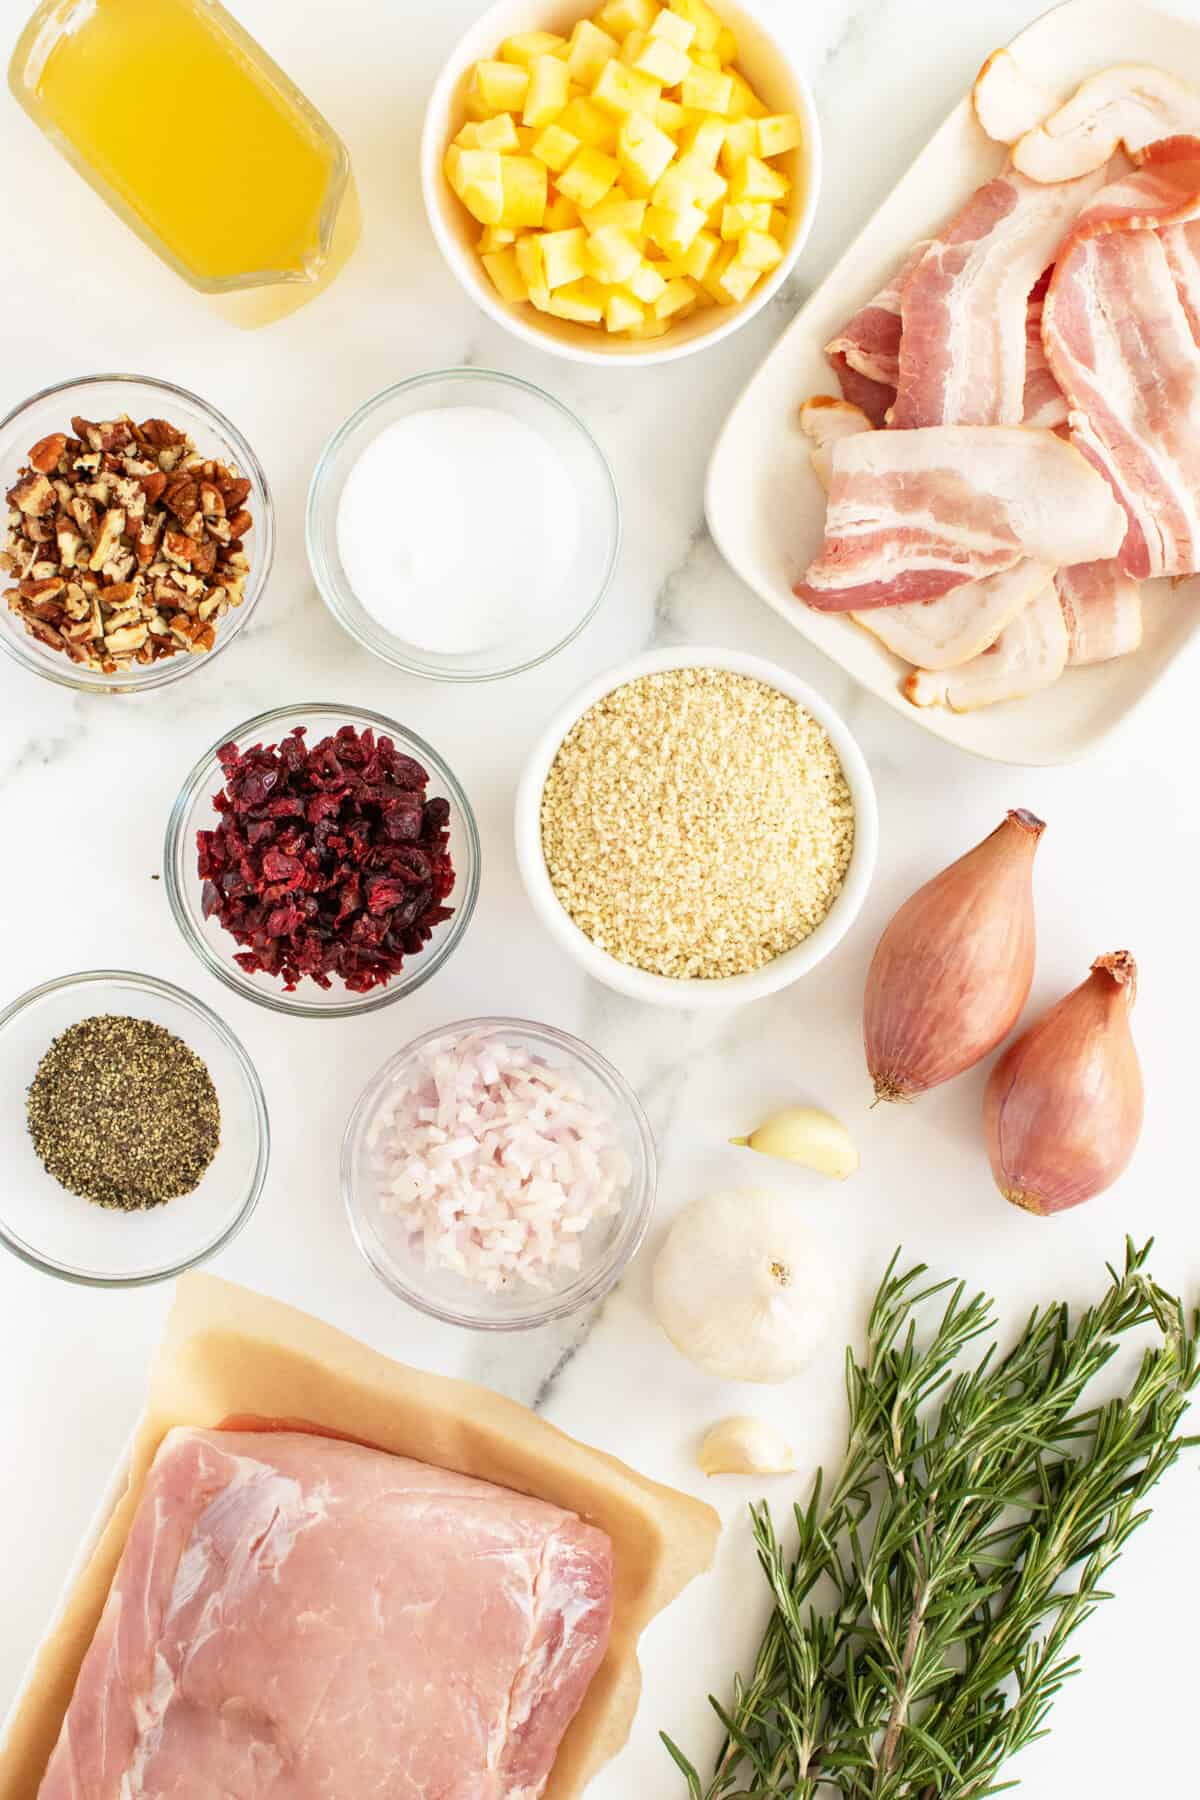 stuffed pork loin ingredients in small white bowls